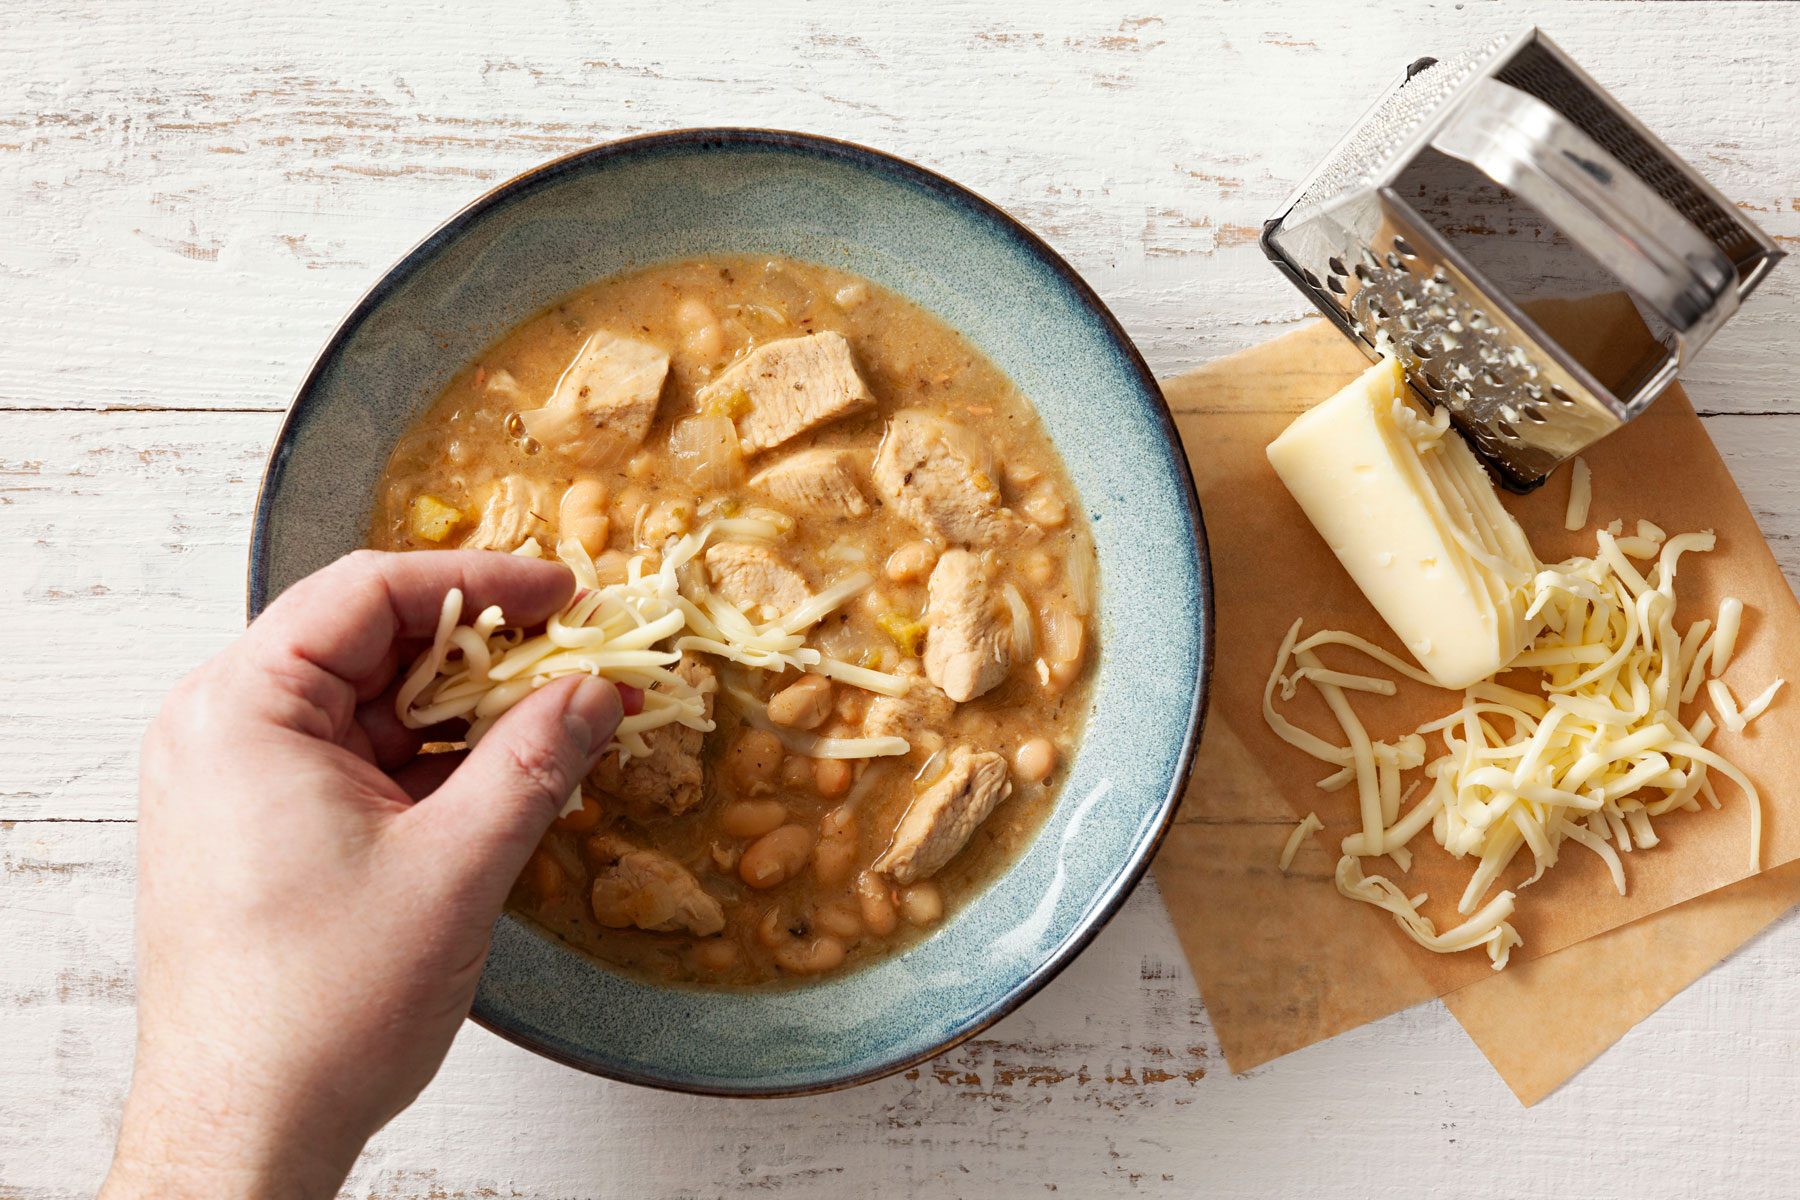 Adding cheese on White-Chicken-Chili in a bowl on a wooden surface